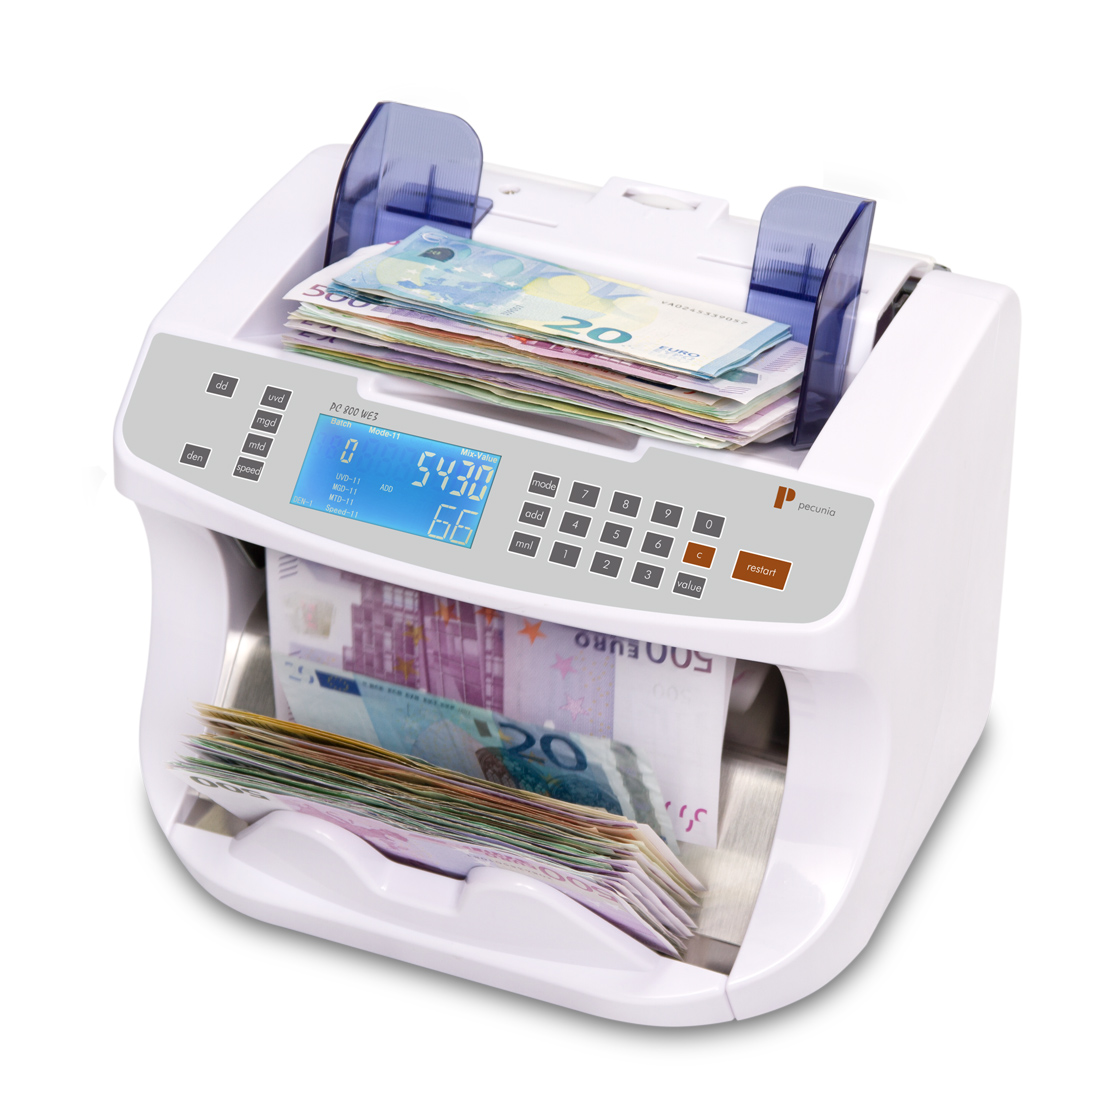 Banknotenzähler Pecunia PC 800 WE3